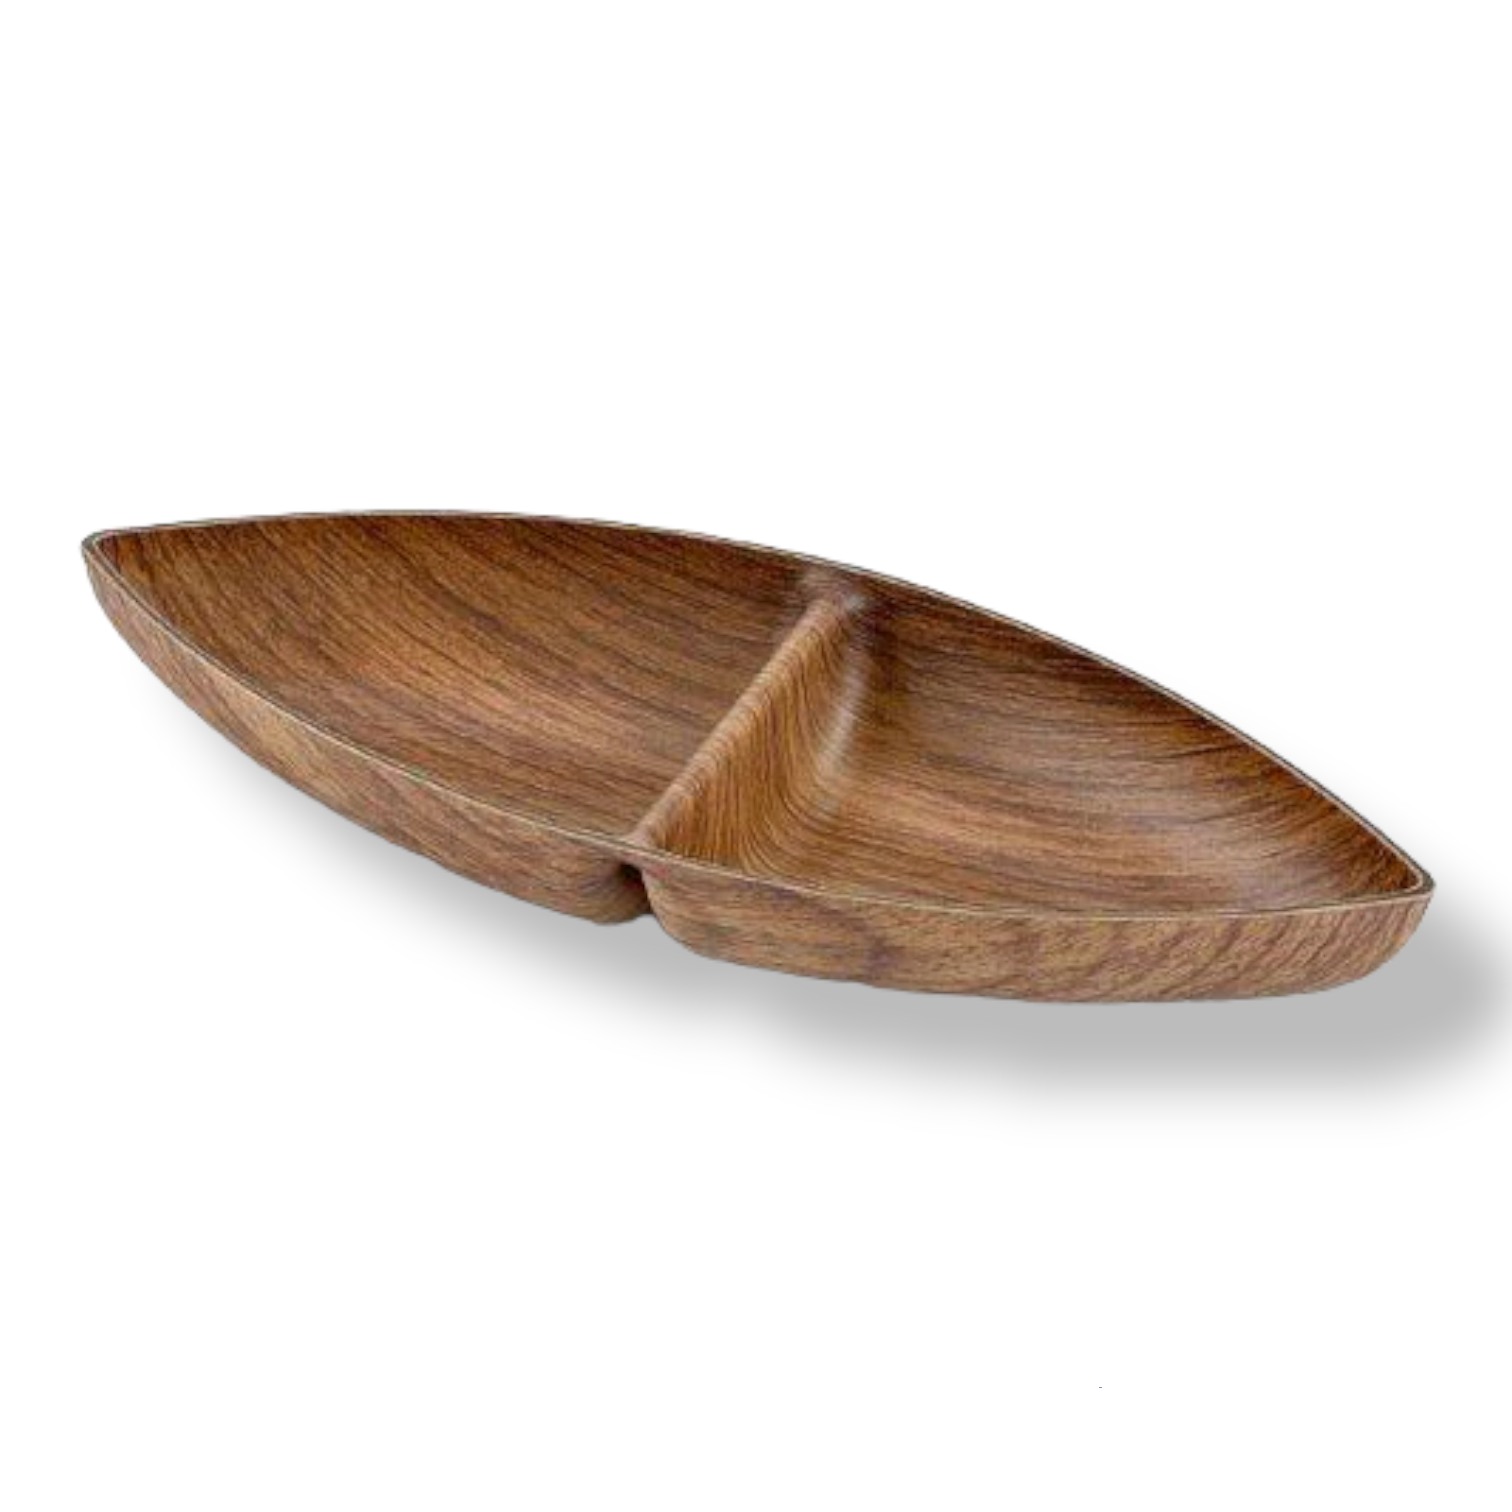 2 Compartment Boat Snack Dish with Wooden Finish - Lunaz Shop